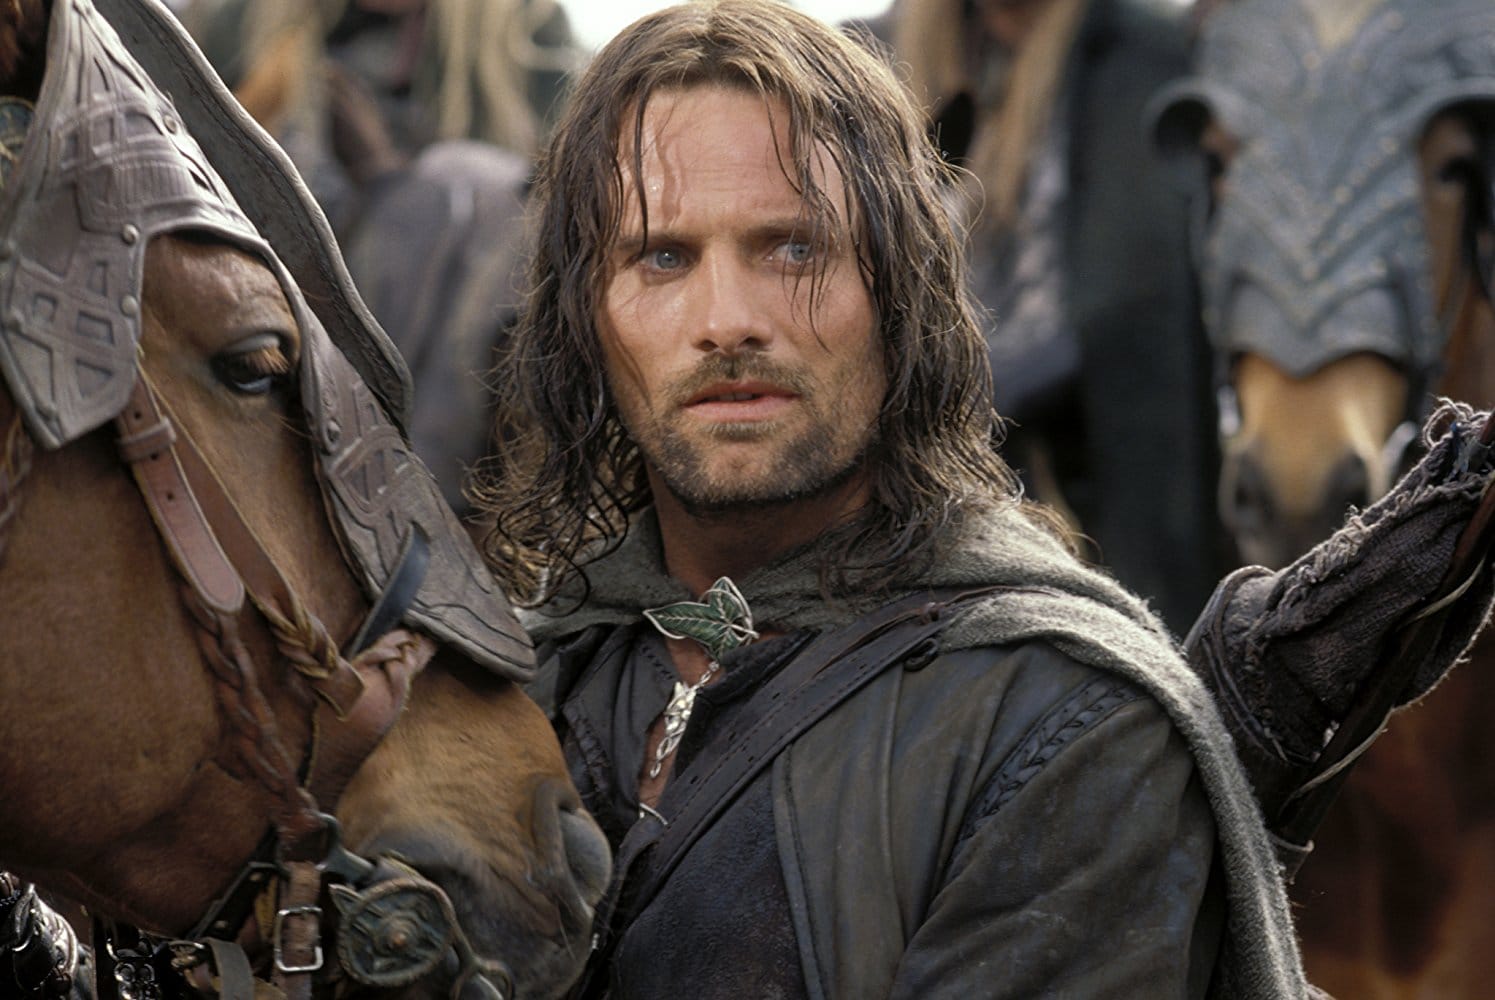 Prove You’re a Film Expert by Scoring 16/20 on This Totally Random Movie Character Quiz 02 Aragorn